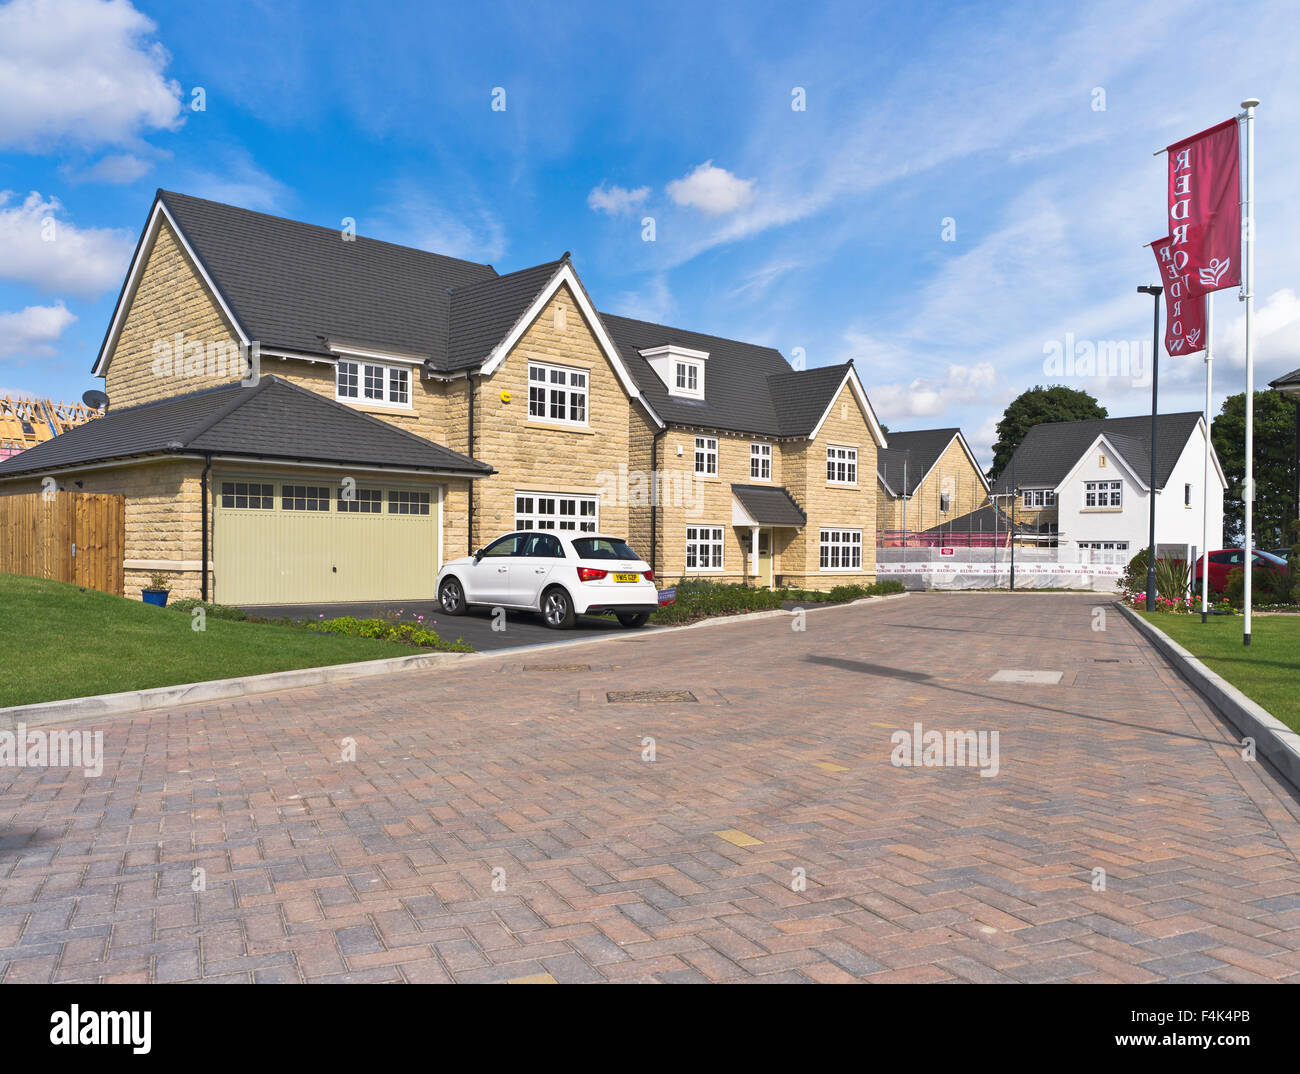 dh  REDROW HOMES UK New houses uk new housing estate development row house build north yorkshire england Stock Photo